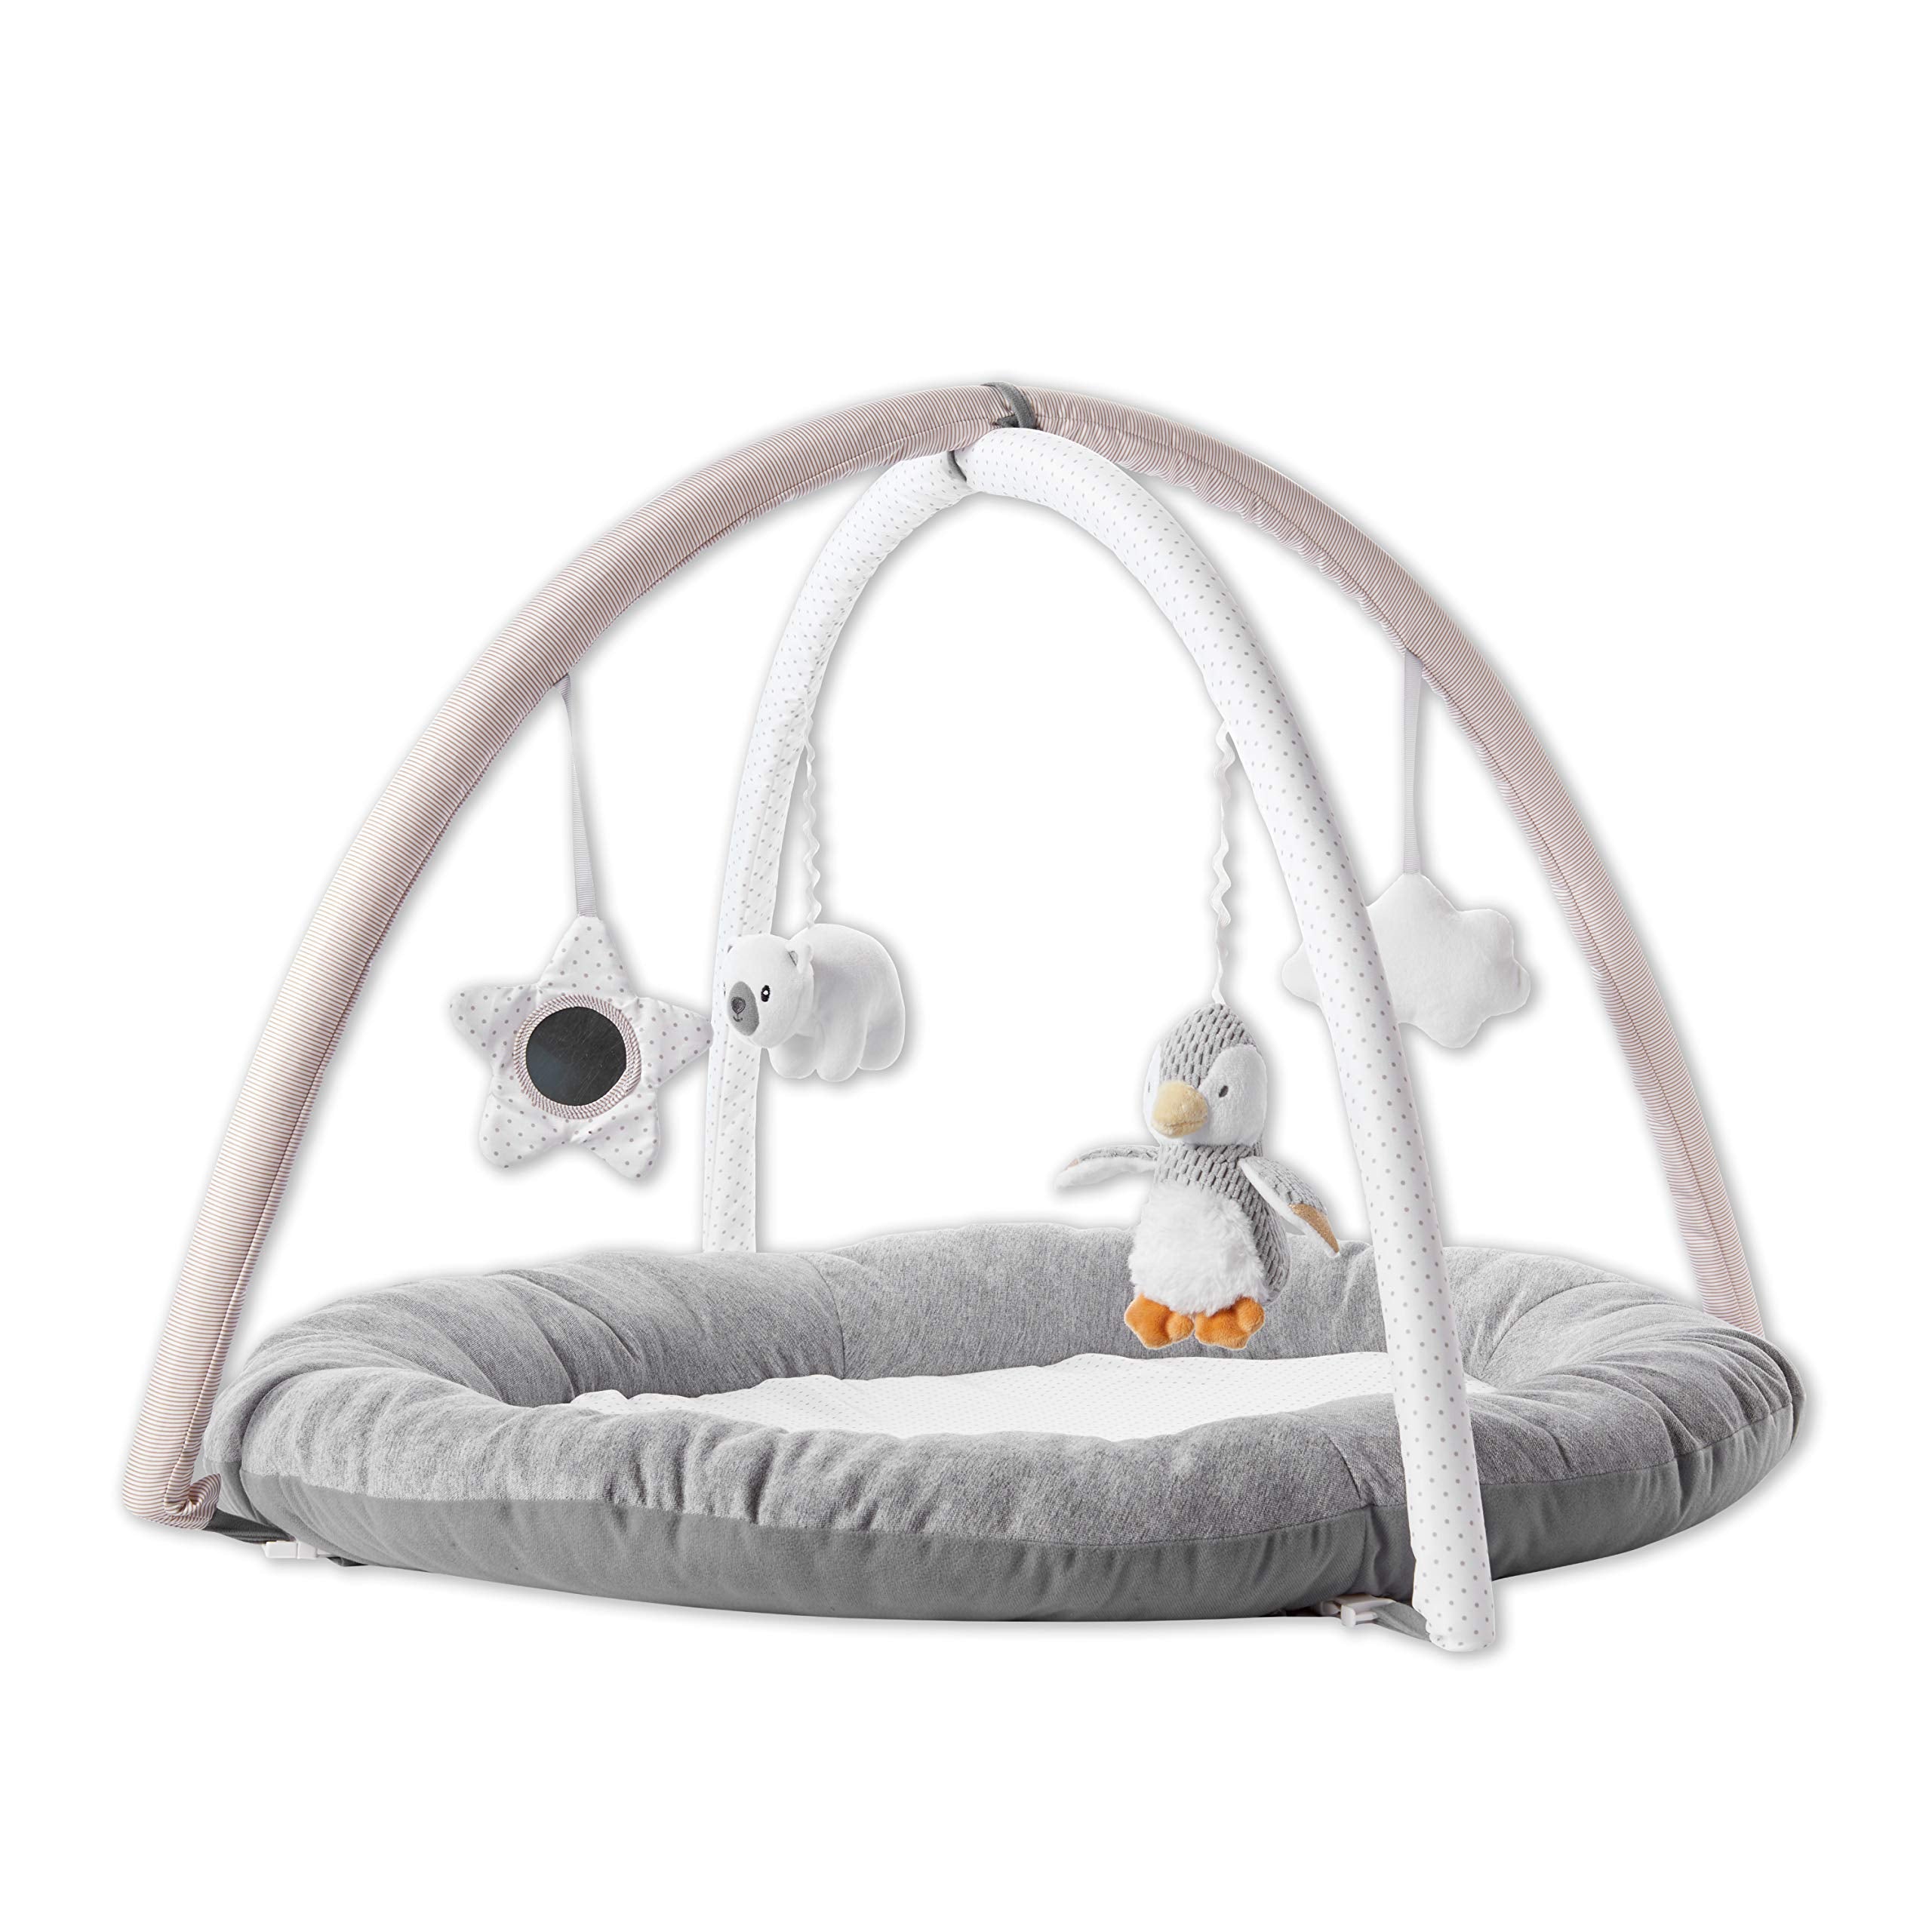 Nuby Penguin Baby Gym, Activity Play Gym Baby Toy with Padded Play Mat Base, Great Baby Gift